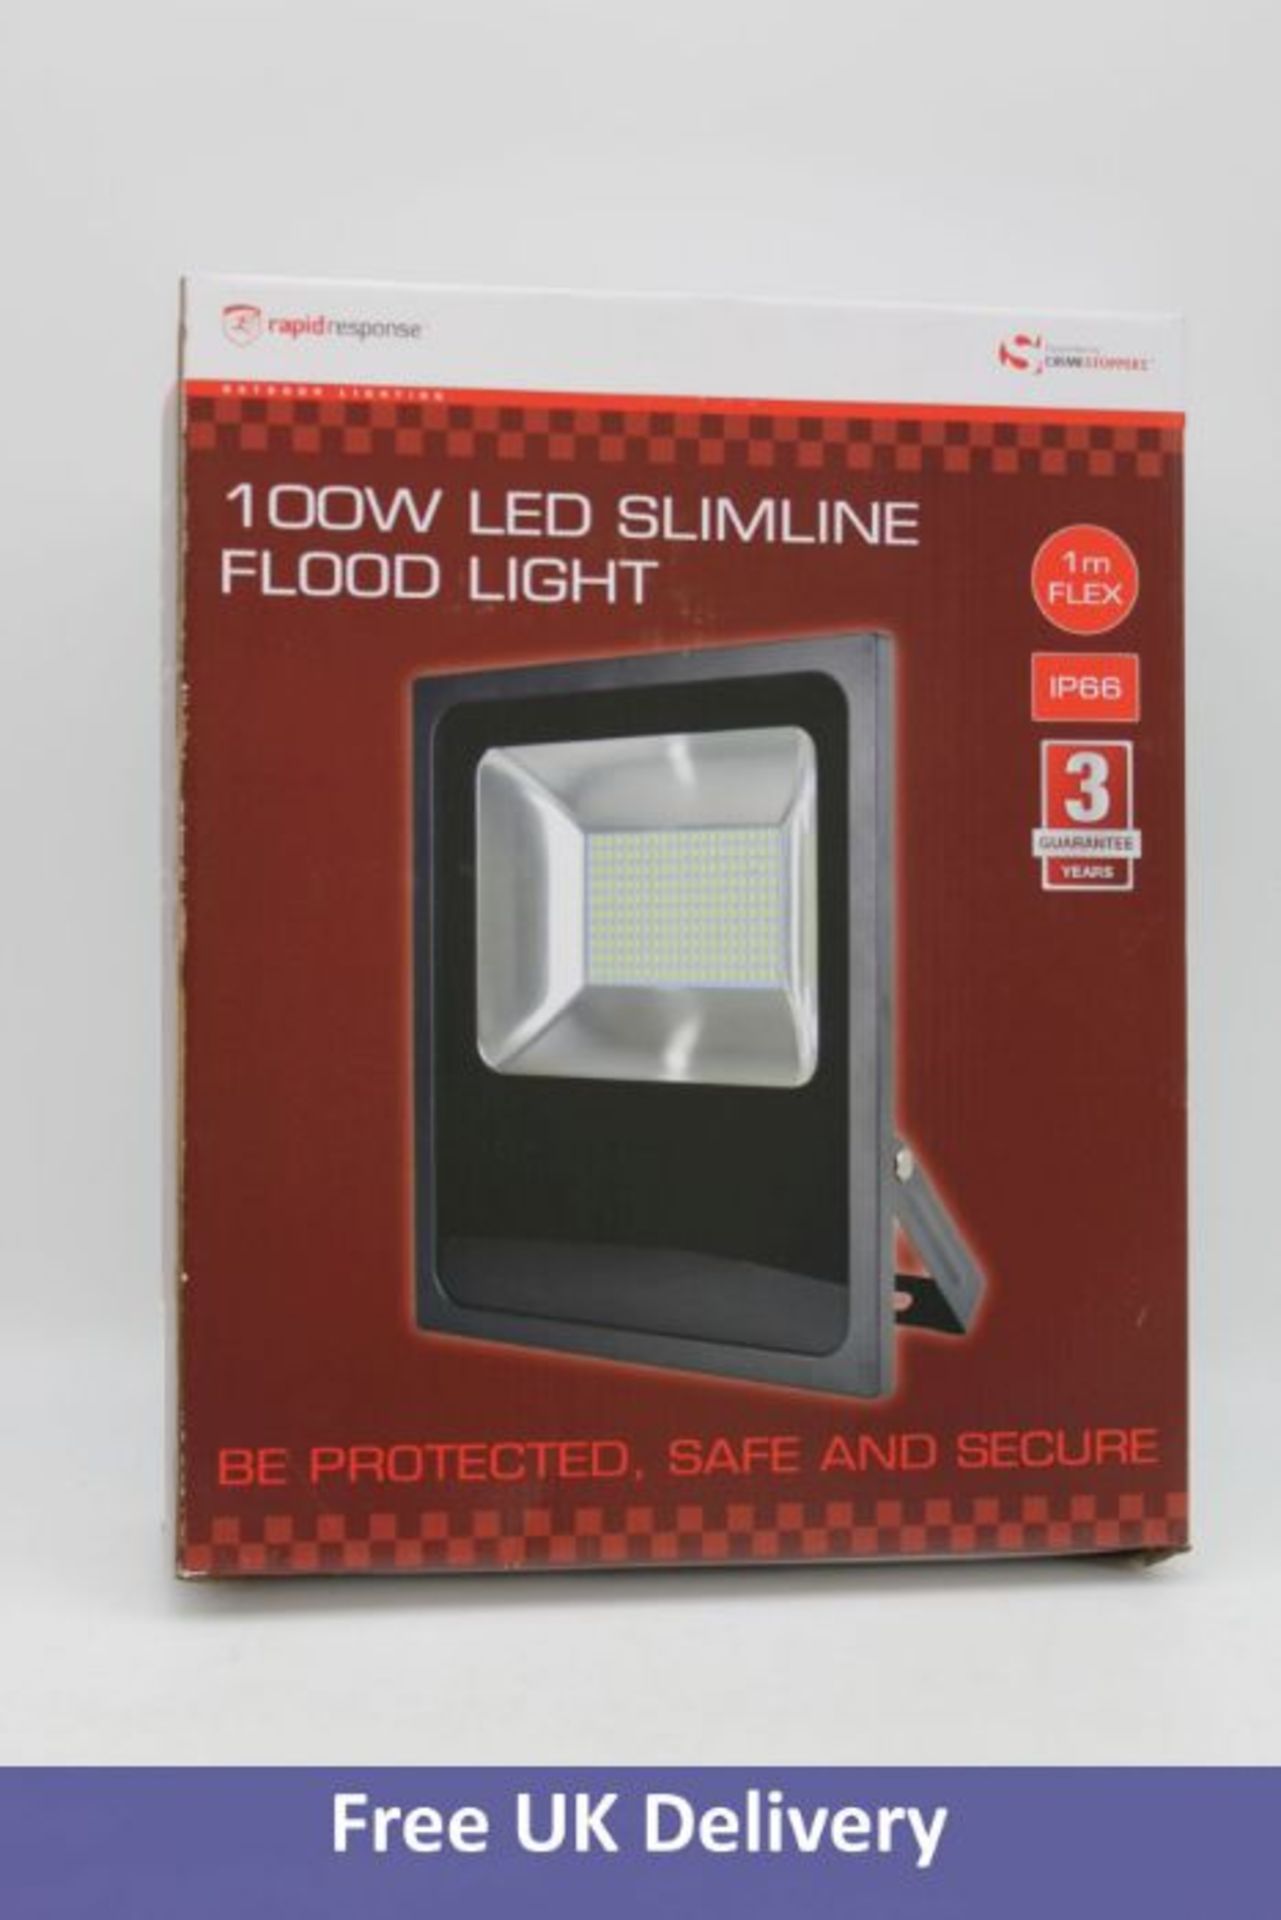 Three Rapid Response 100w Slimline LED Floodlight with 1m Cable, Energy Rating A+, Black - Image 2 of 3